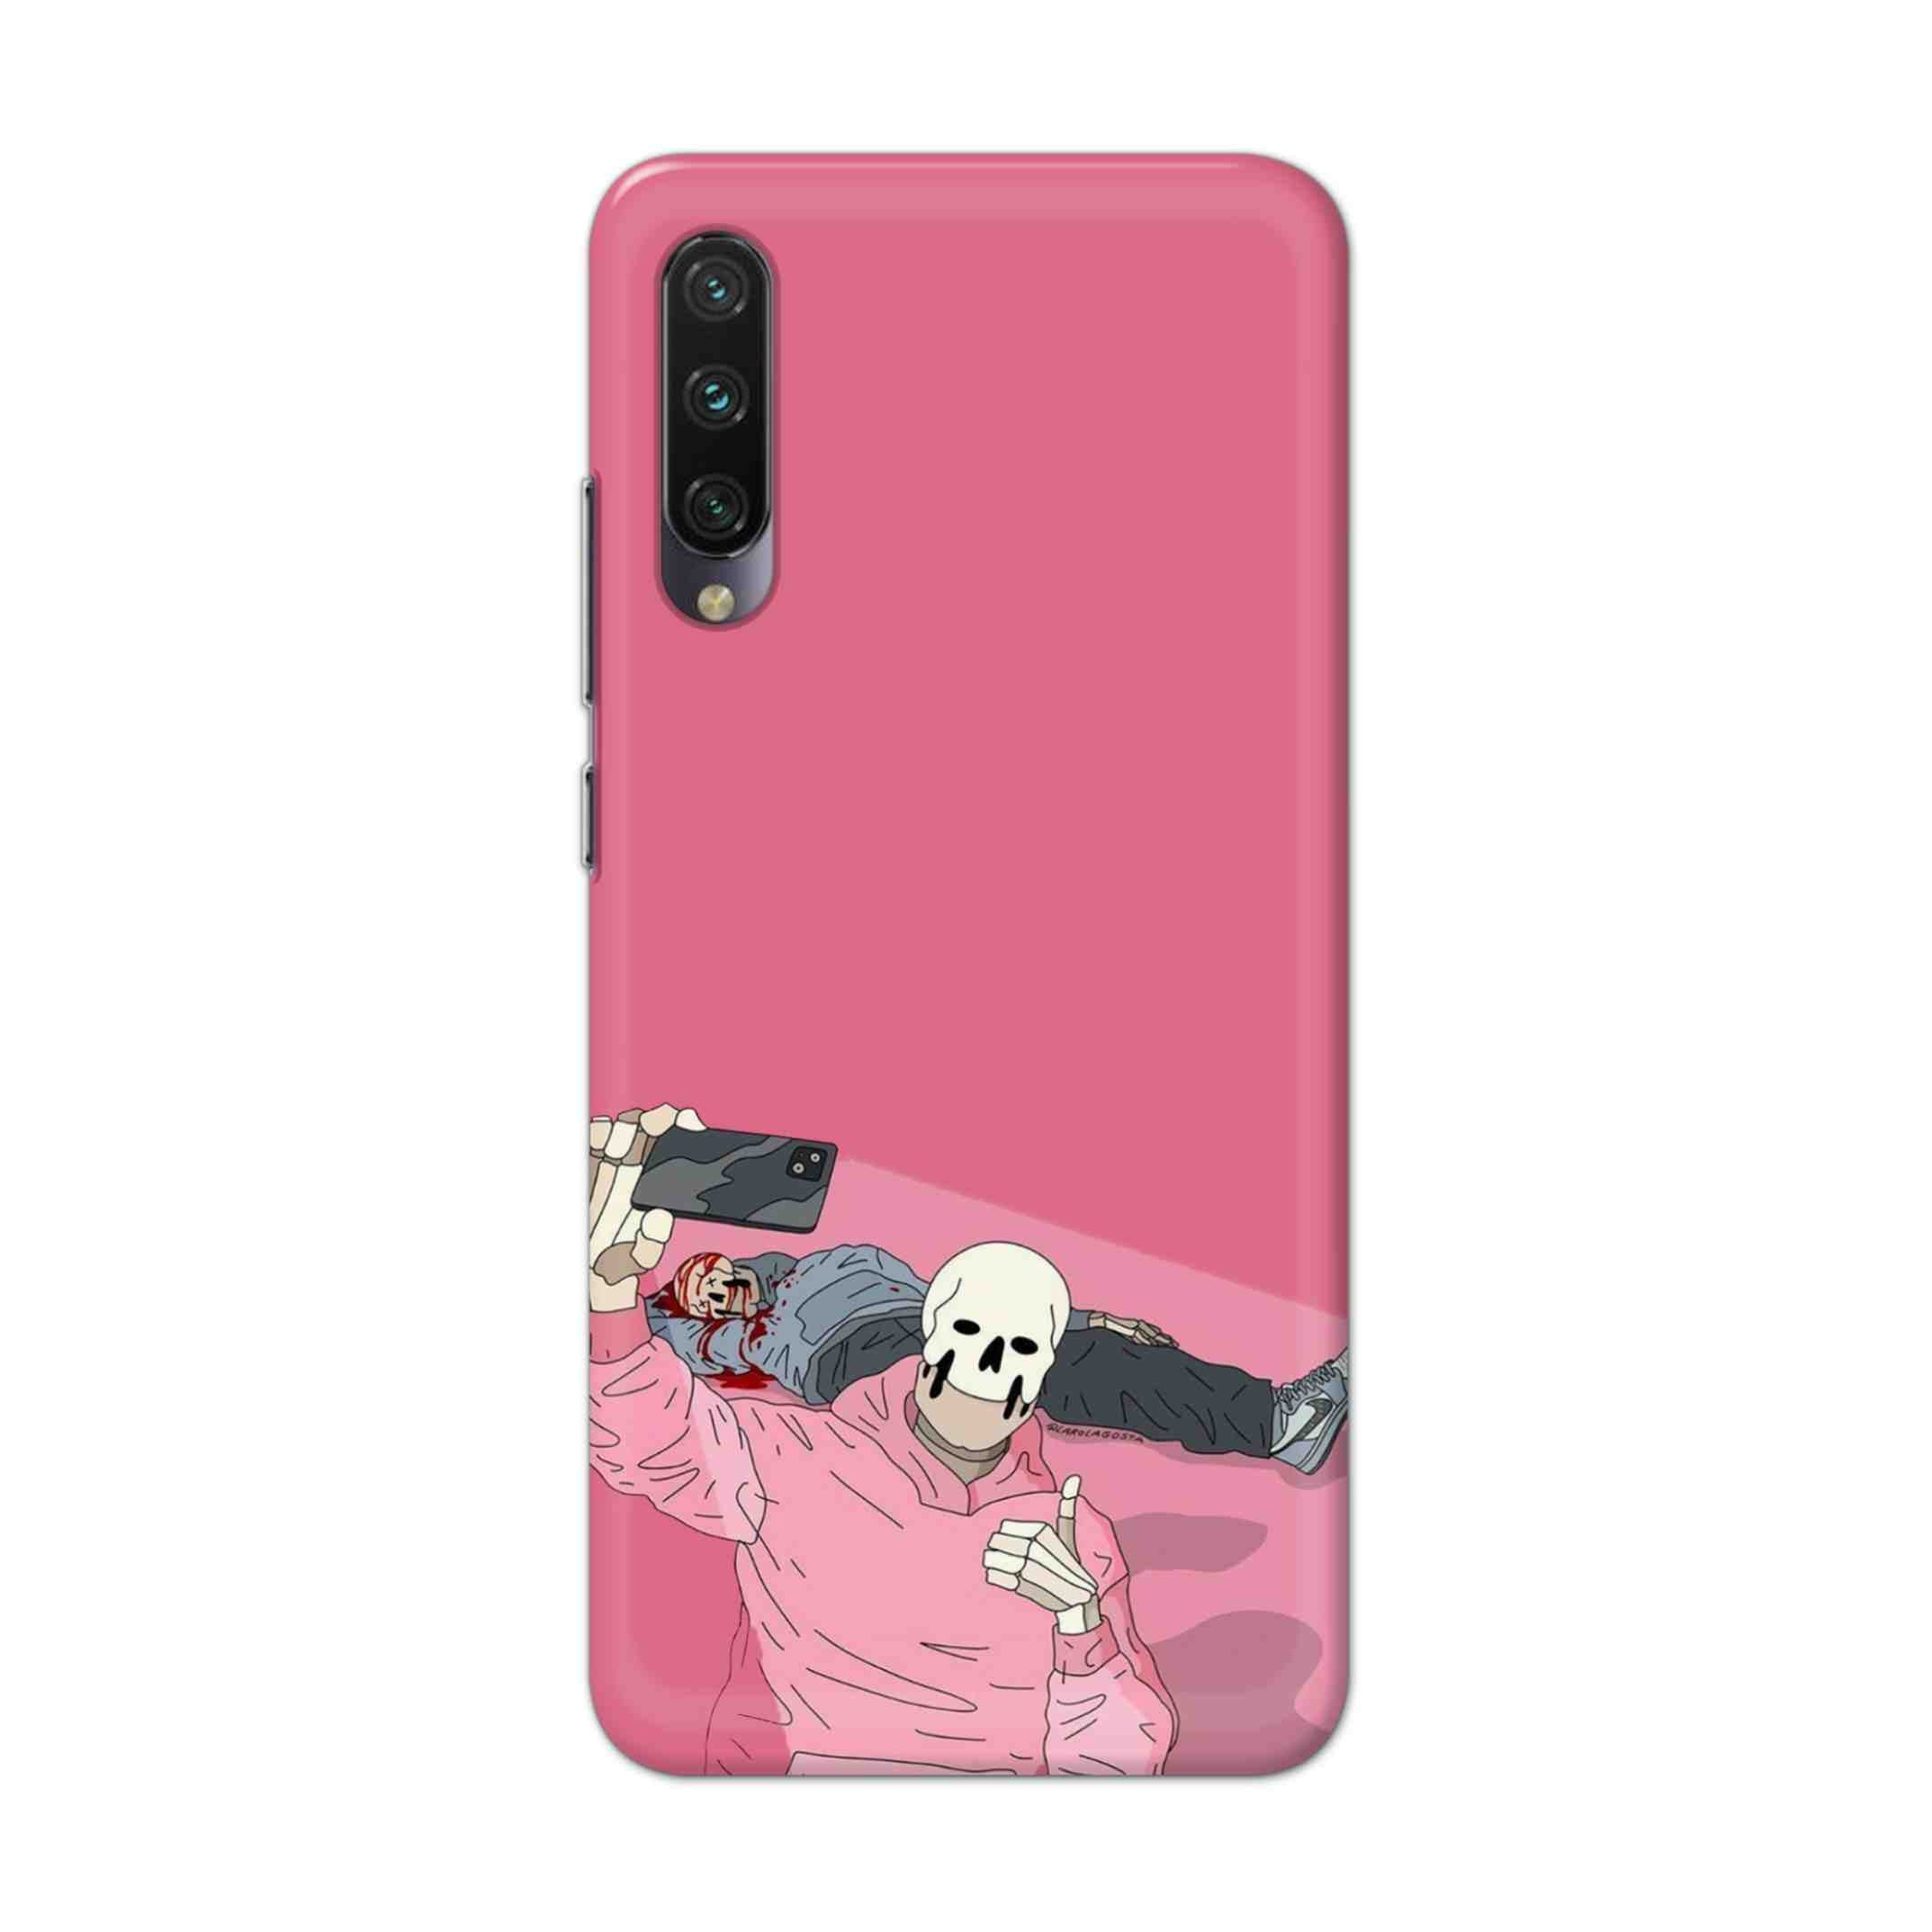 Buy Selfie Hard Back Mobile Phone Case Cover For Xiaomi Mi A3 Online